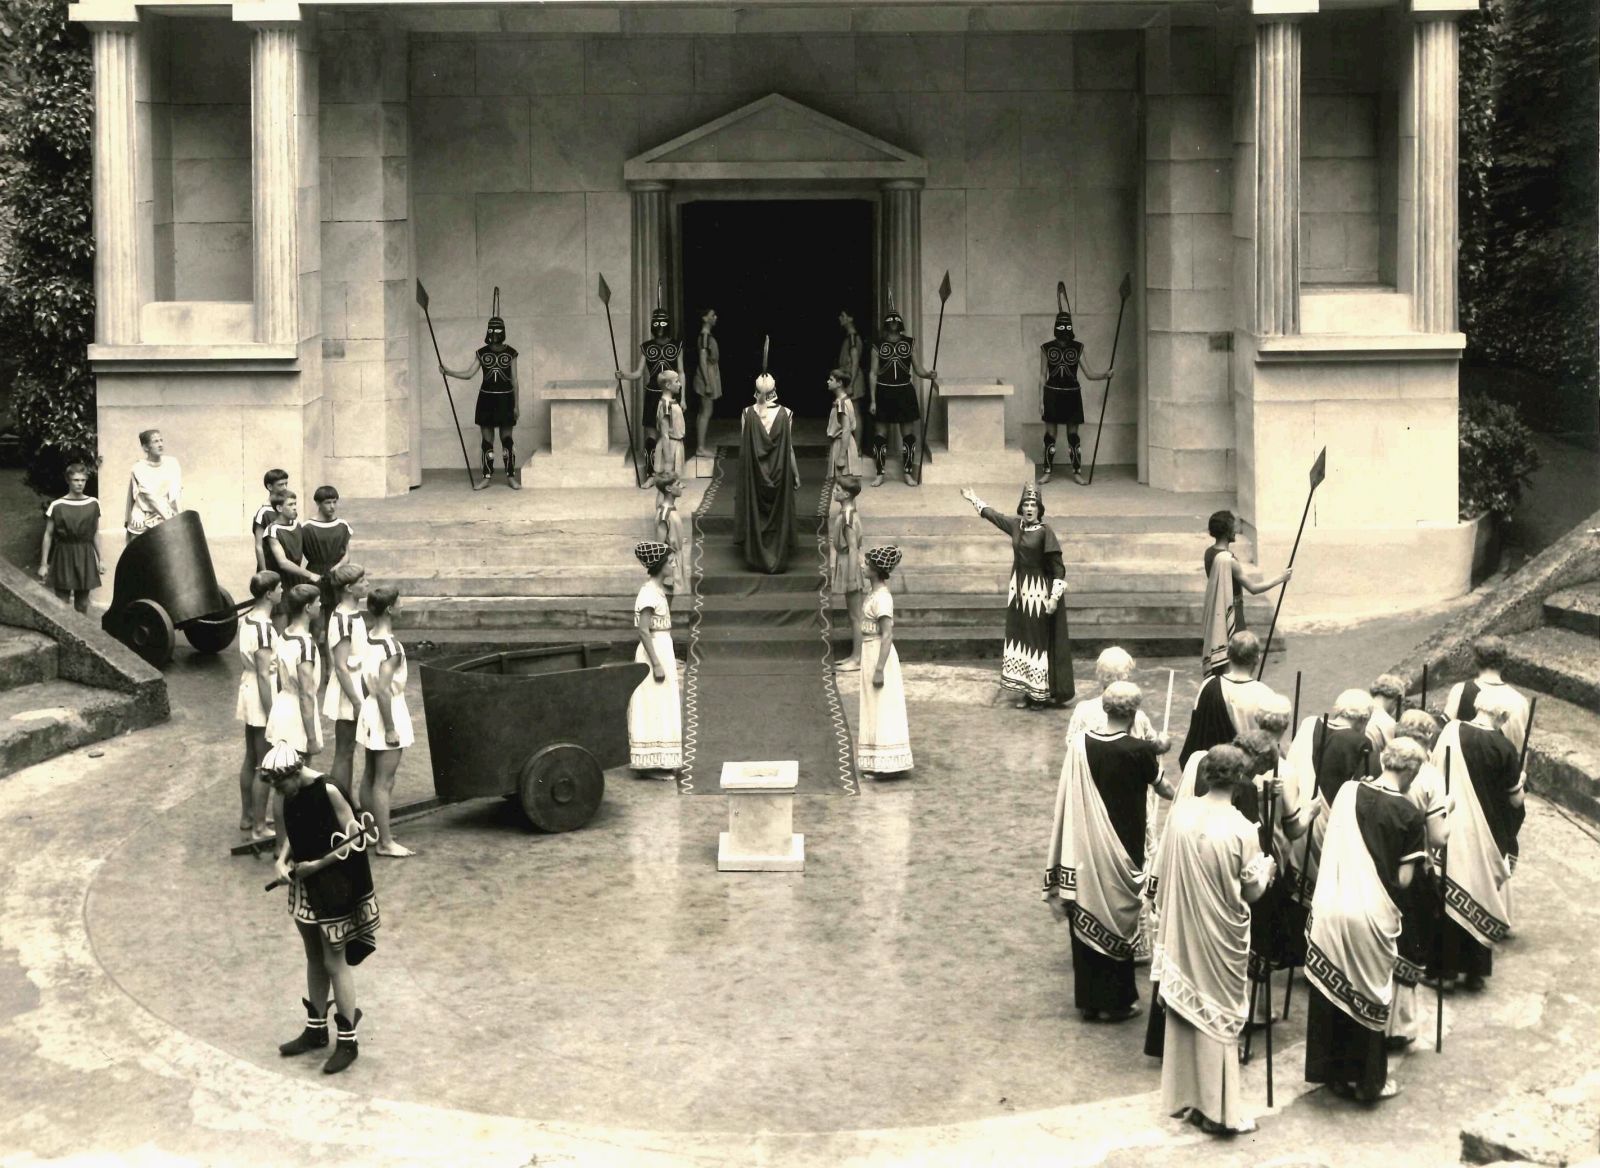 Aeschylus Agamemnon, Bradfield College Theatre, 1958. The king enters his palace over crimson tapestries. 